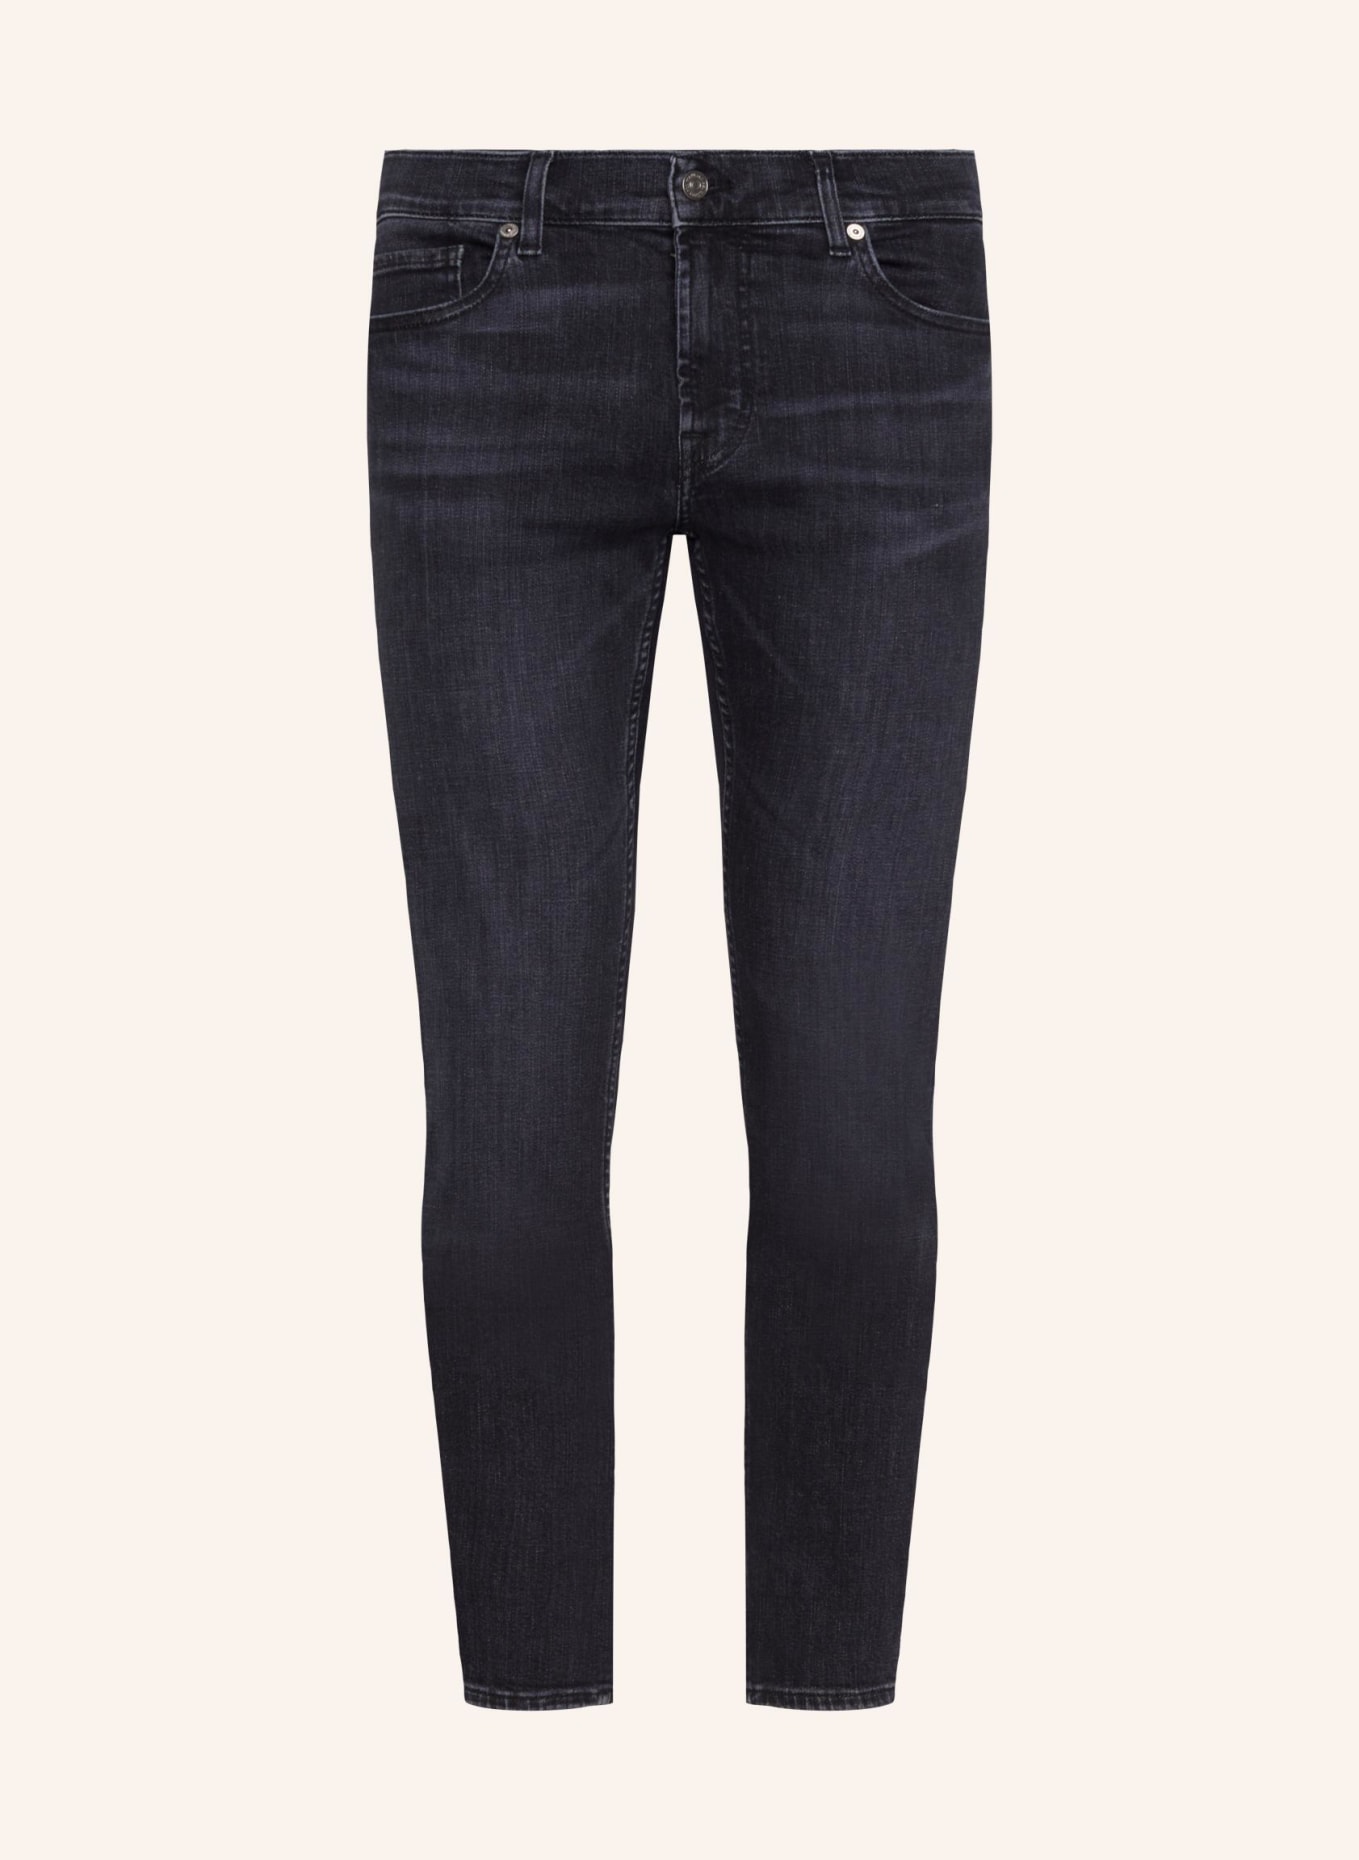 7 for all mankind Jeans PAXTYN TAPERED Skinny Fit, Farbe: SCHWARZ (Bild 1)